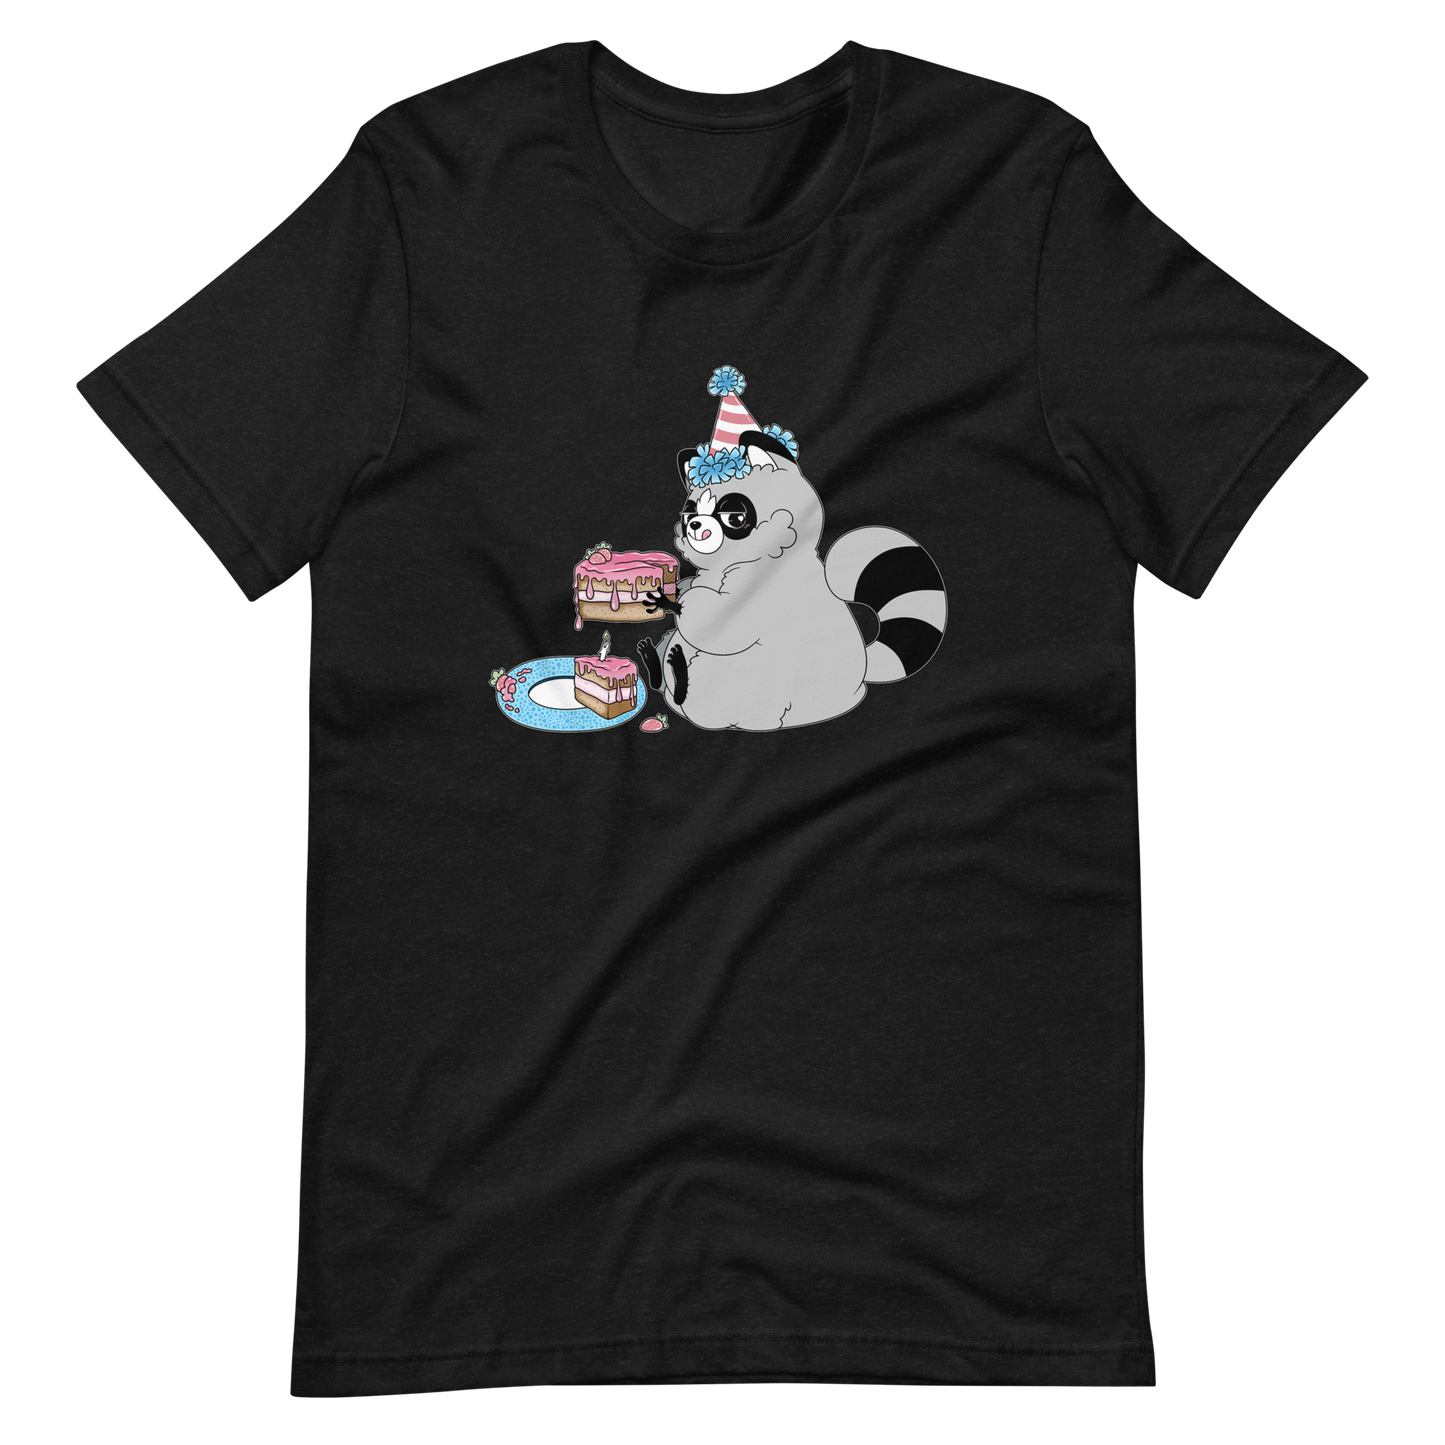 Chaps the Raccoon Birthday Party Unisex t-shirt